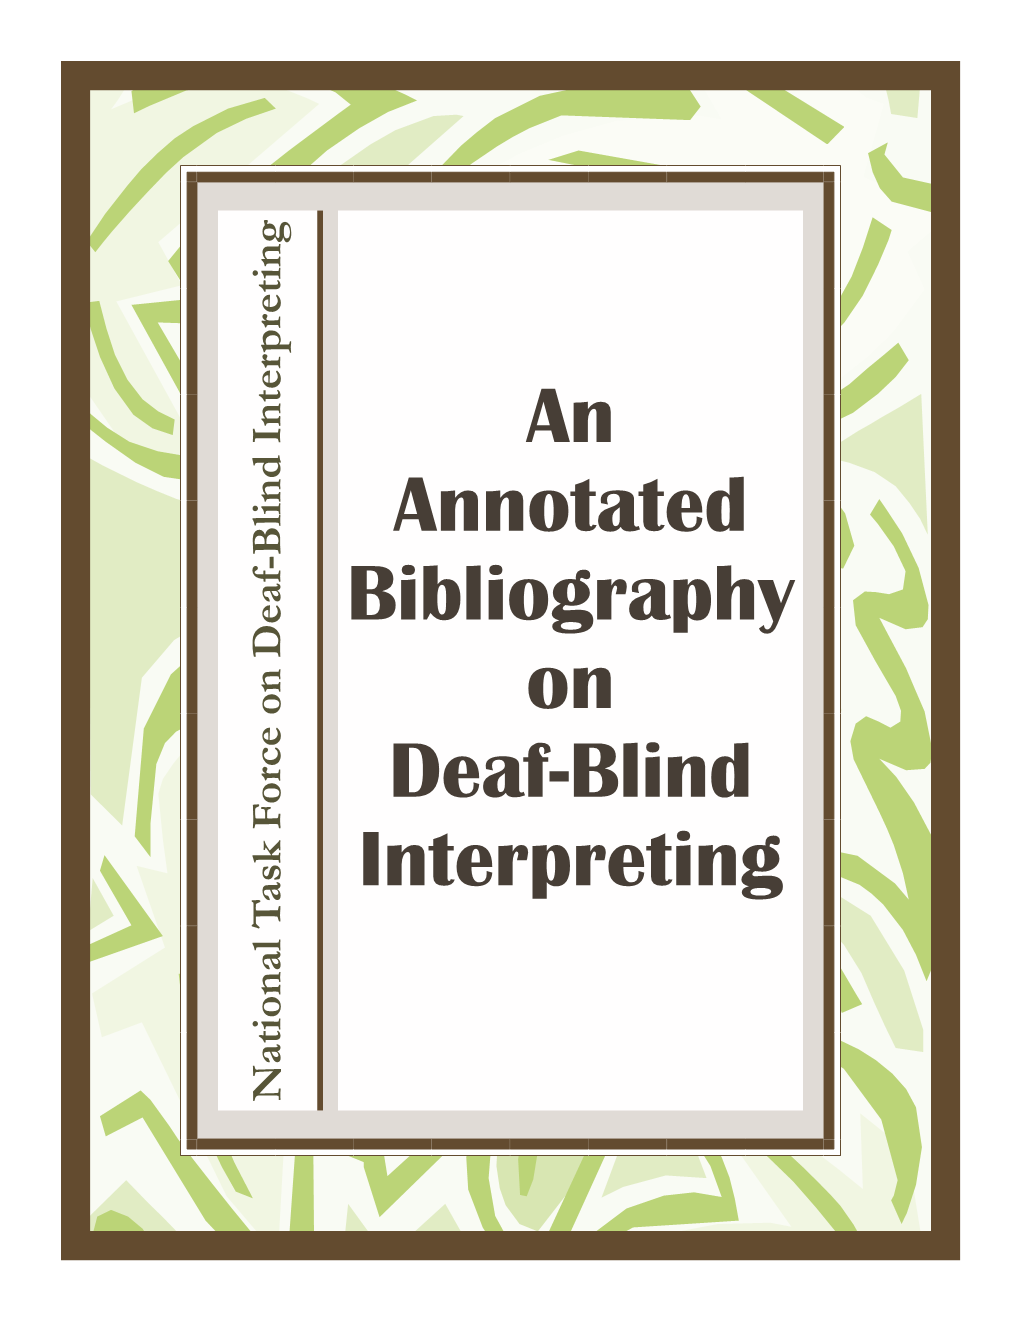 An Annotated Bibliography on Deaf-Blind Interpreting National Task Force on Deaf-Blind Interpreting Force National Task